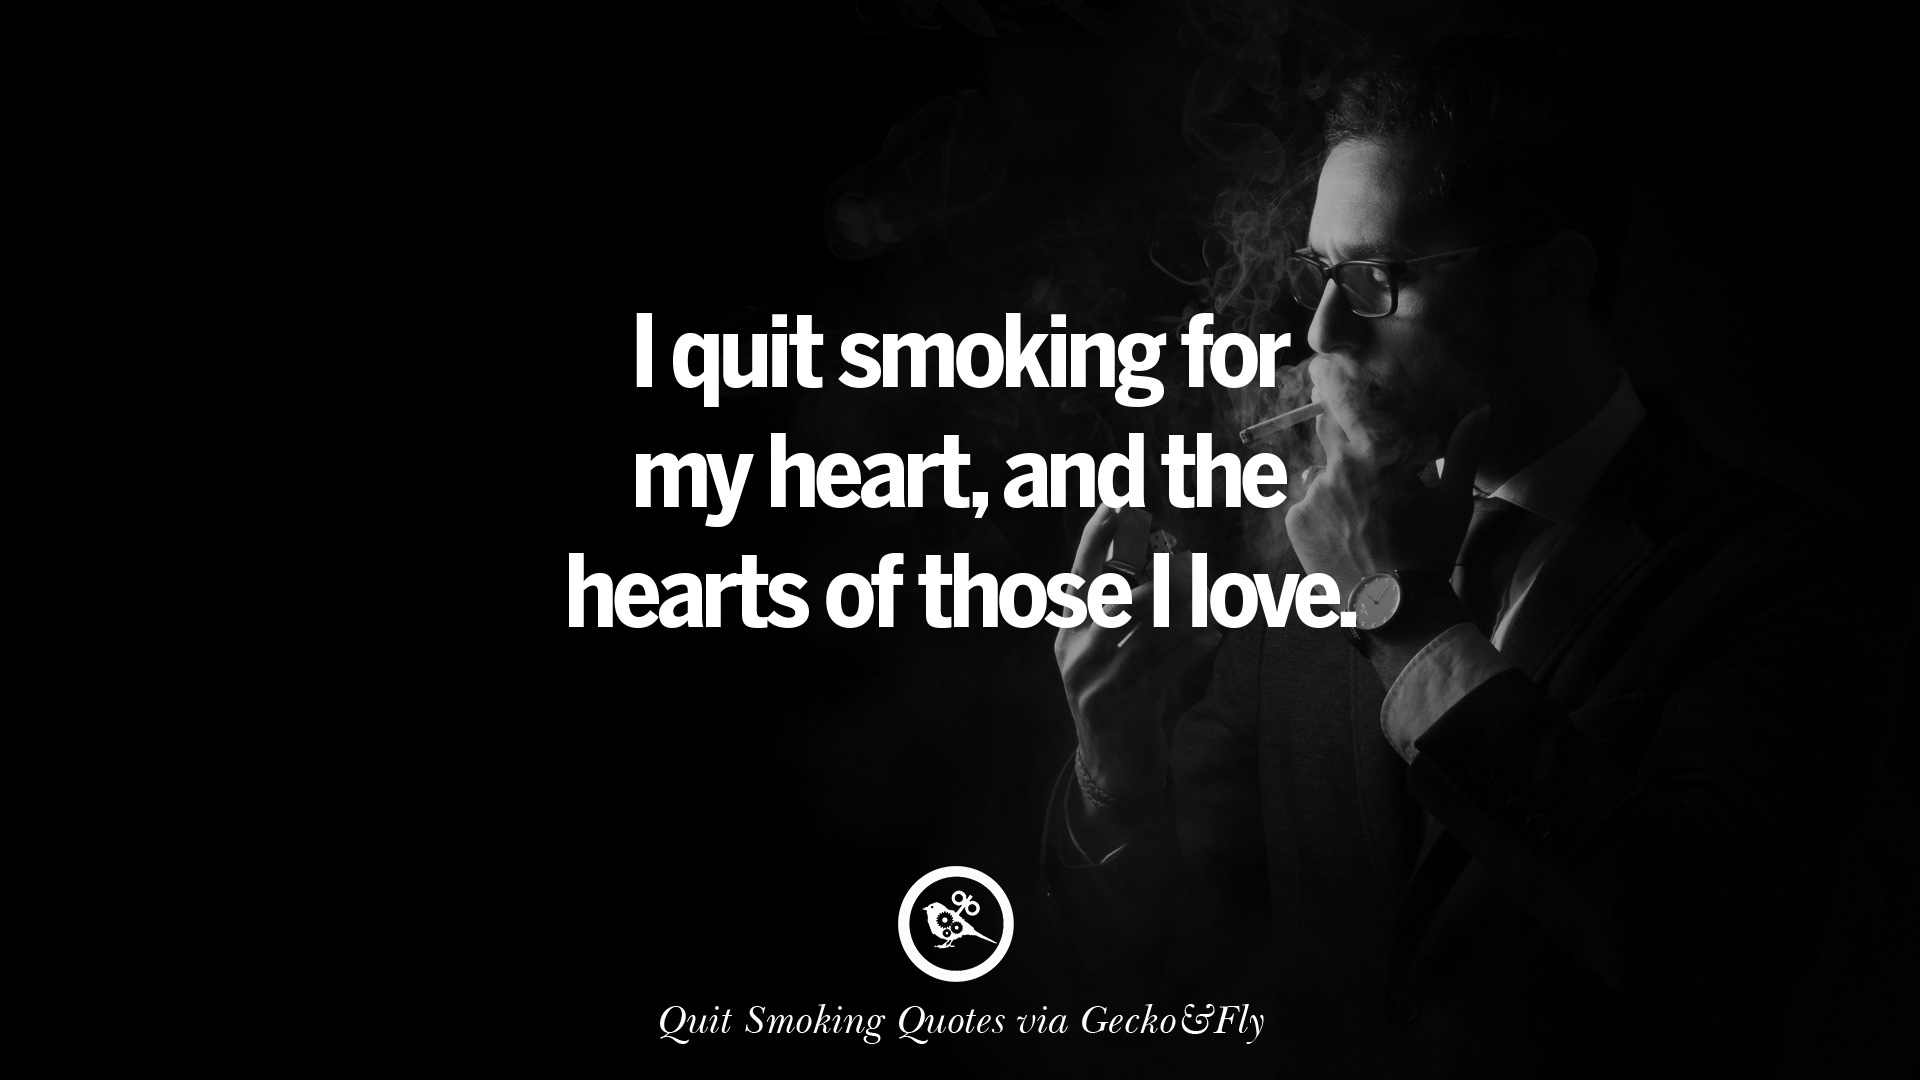 Motivational Quotes To Stop Smoking